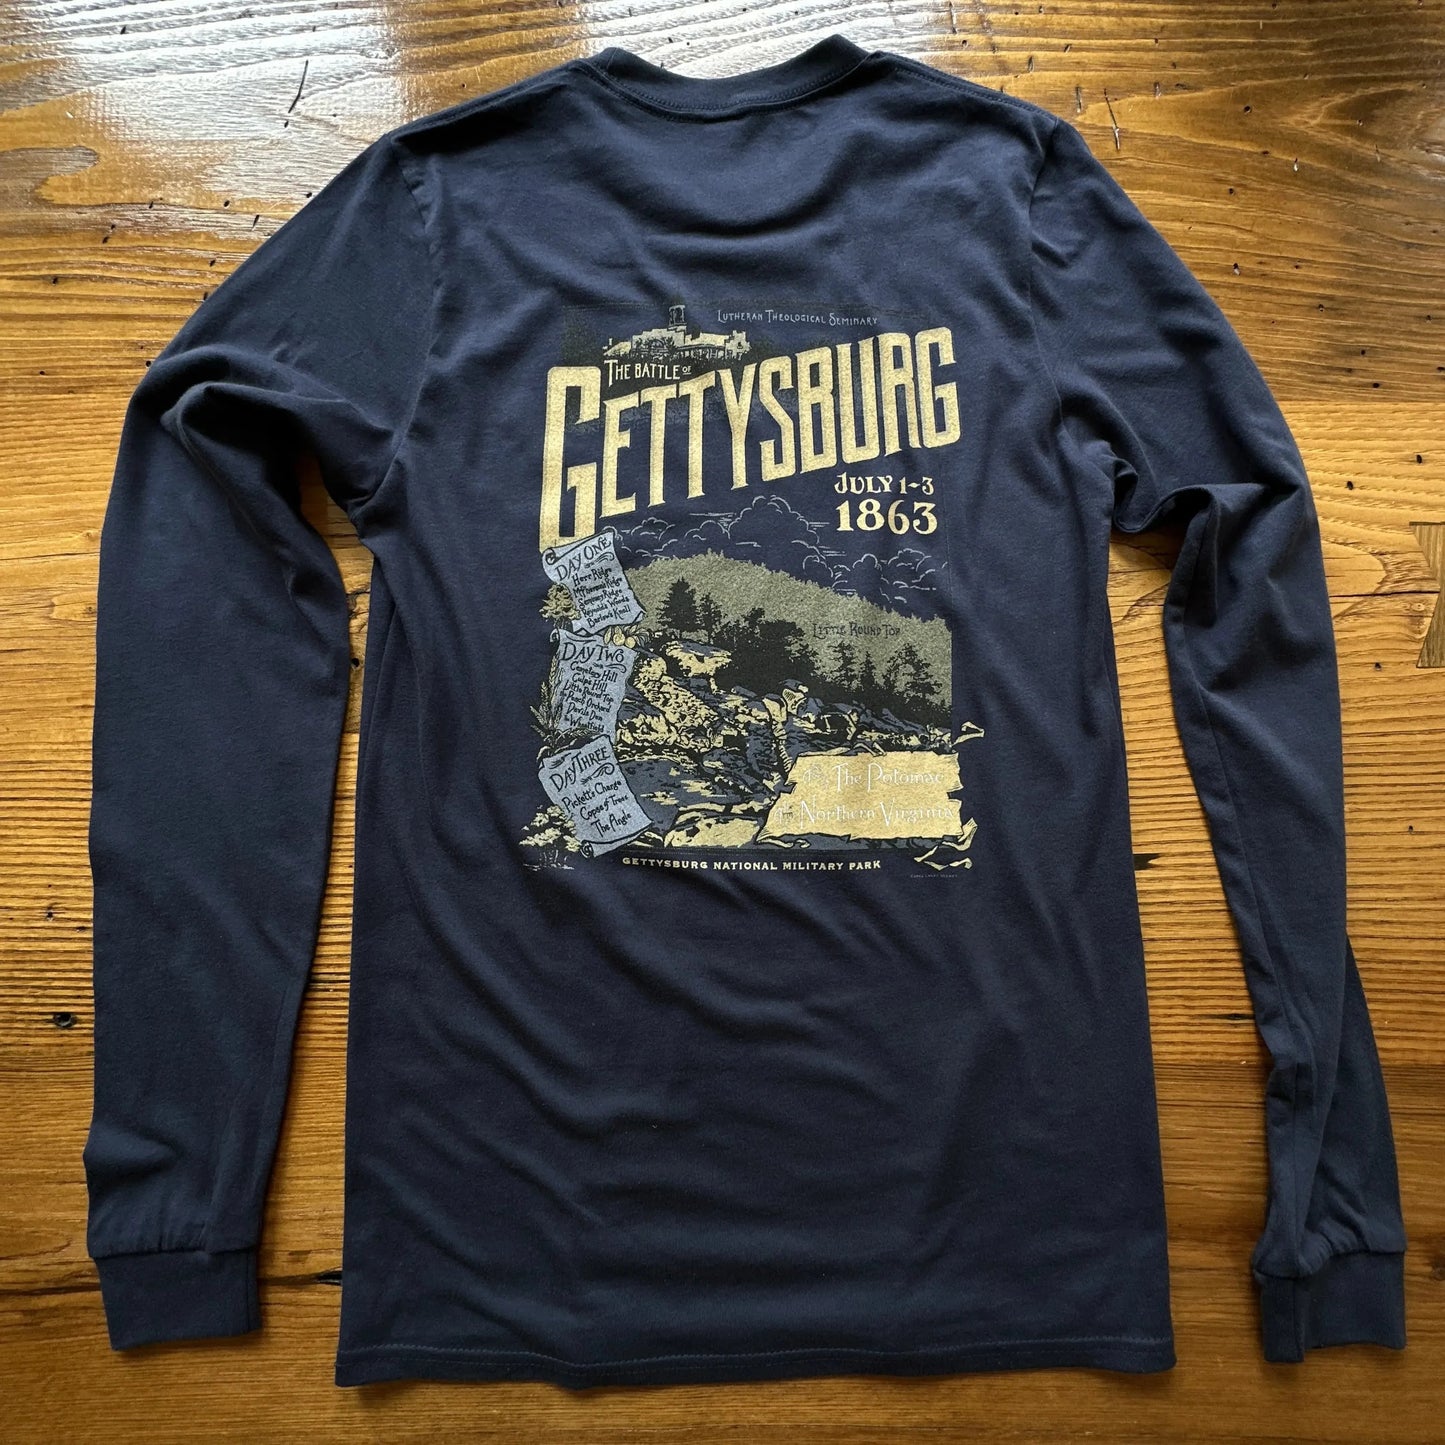 Back of "The Battle of Gettysburg" Long-sleeved shirt from The History List store